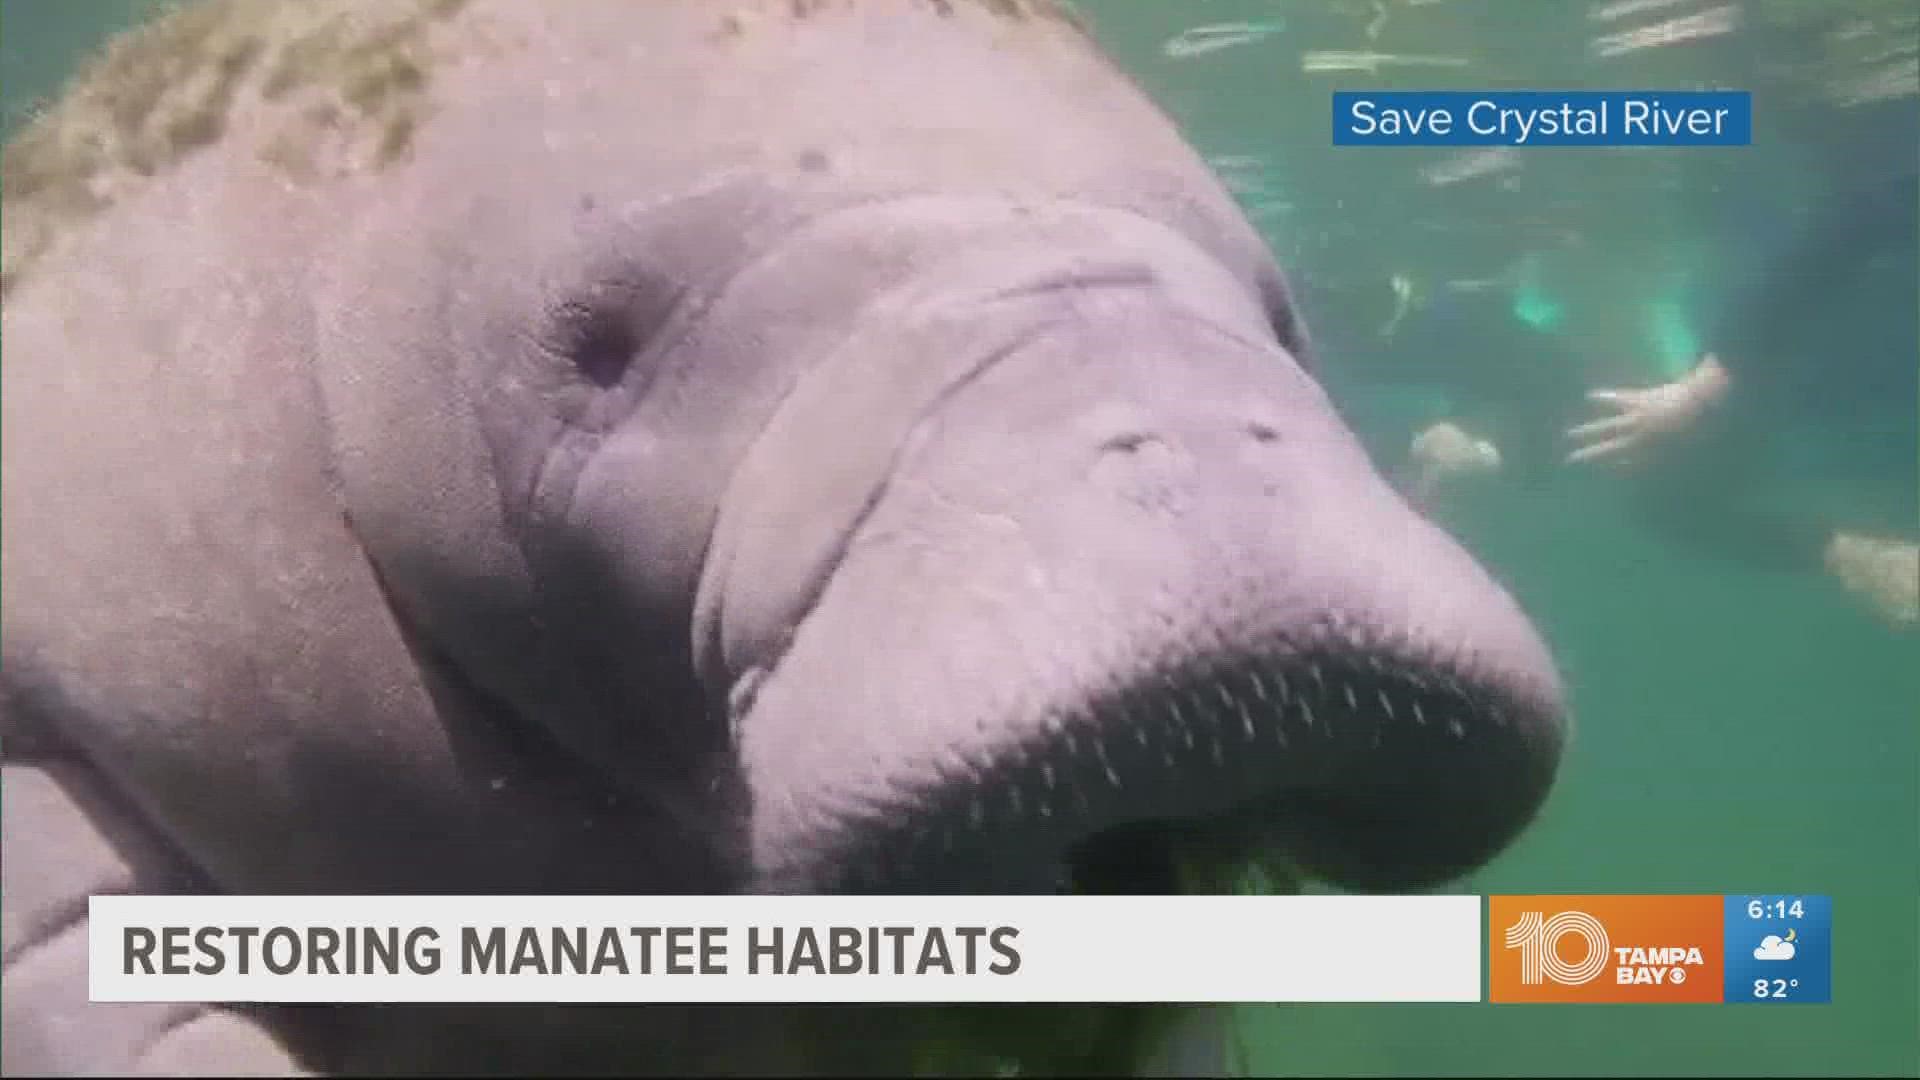 Their efforts are focused on restoring eelgrass for manatees to feed on.